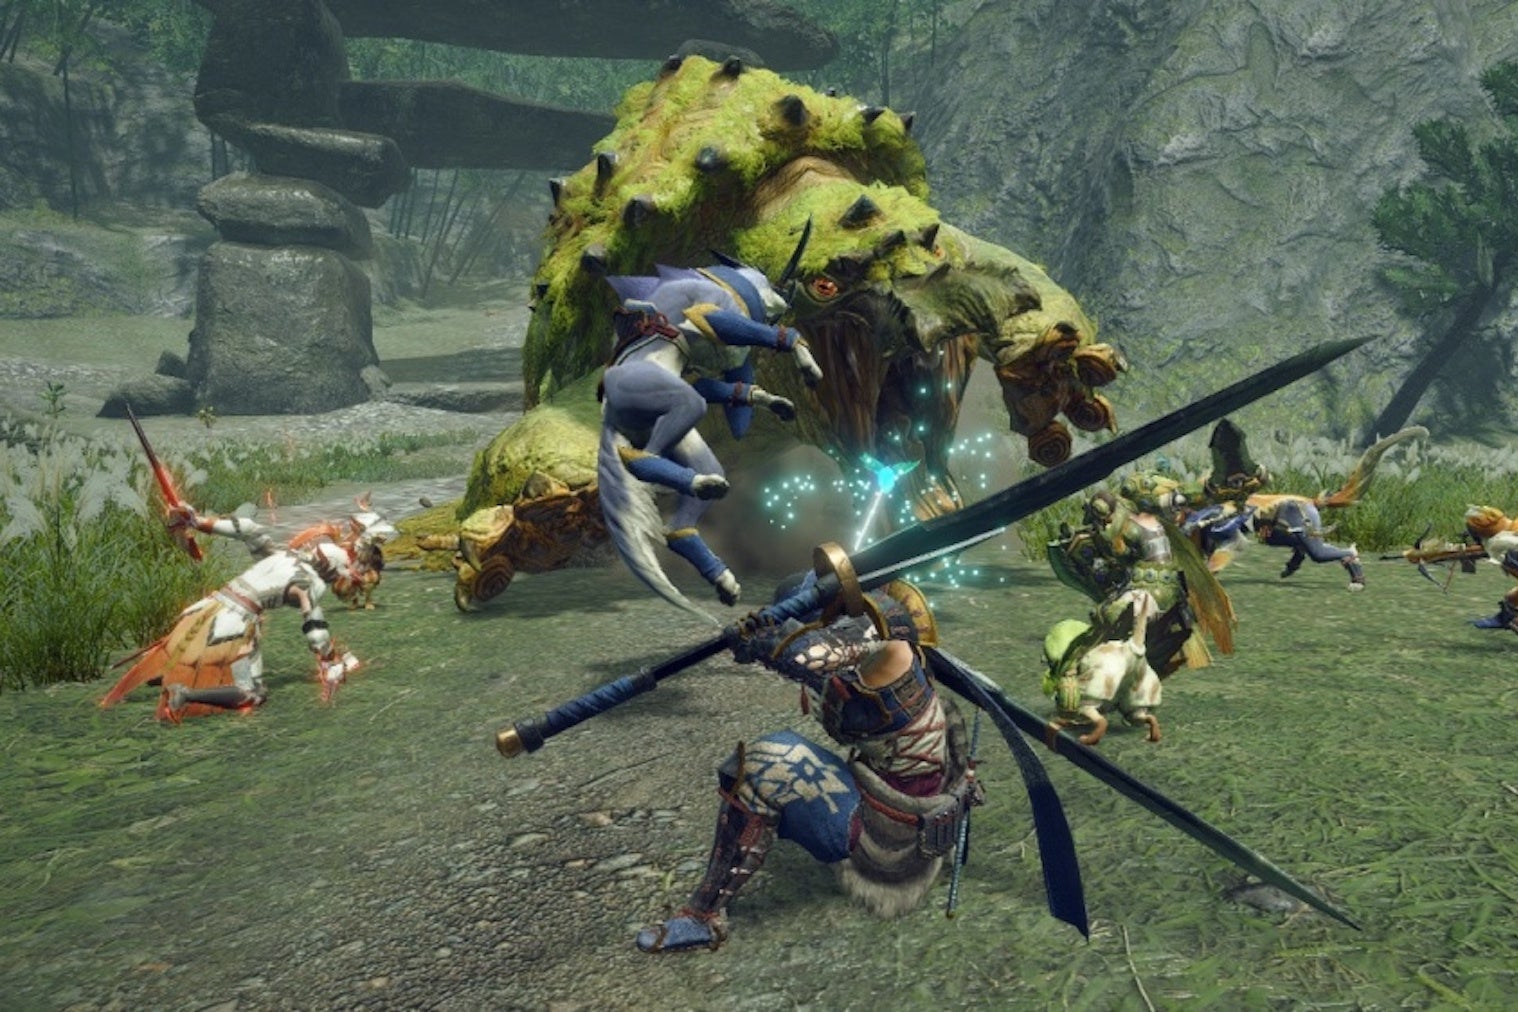 A group of warriors stand in a grassy field and fight against a large green monster. They are wielding swords.